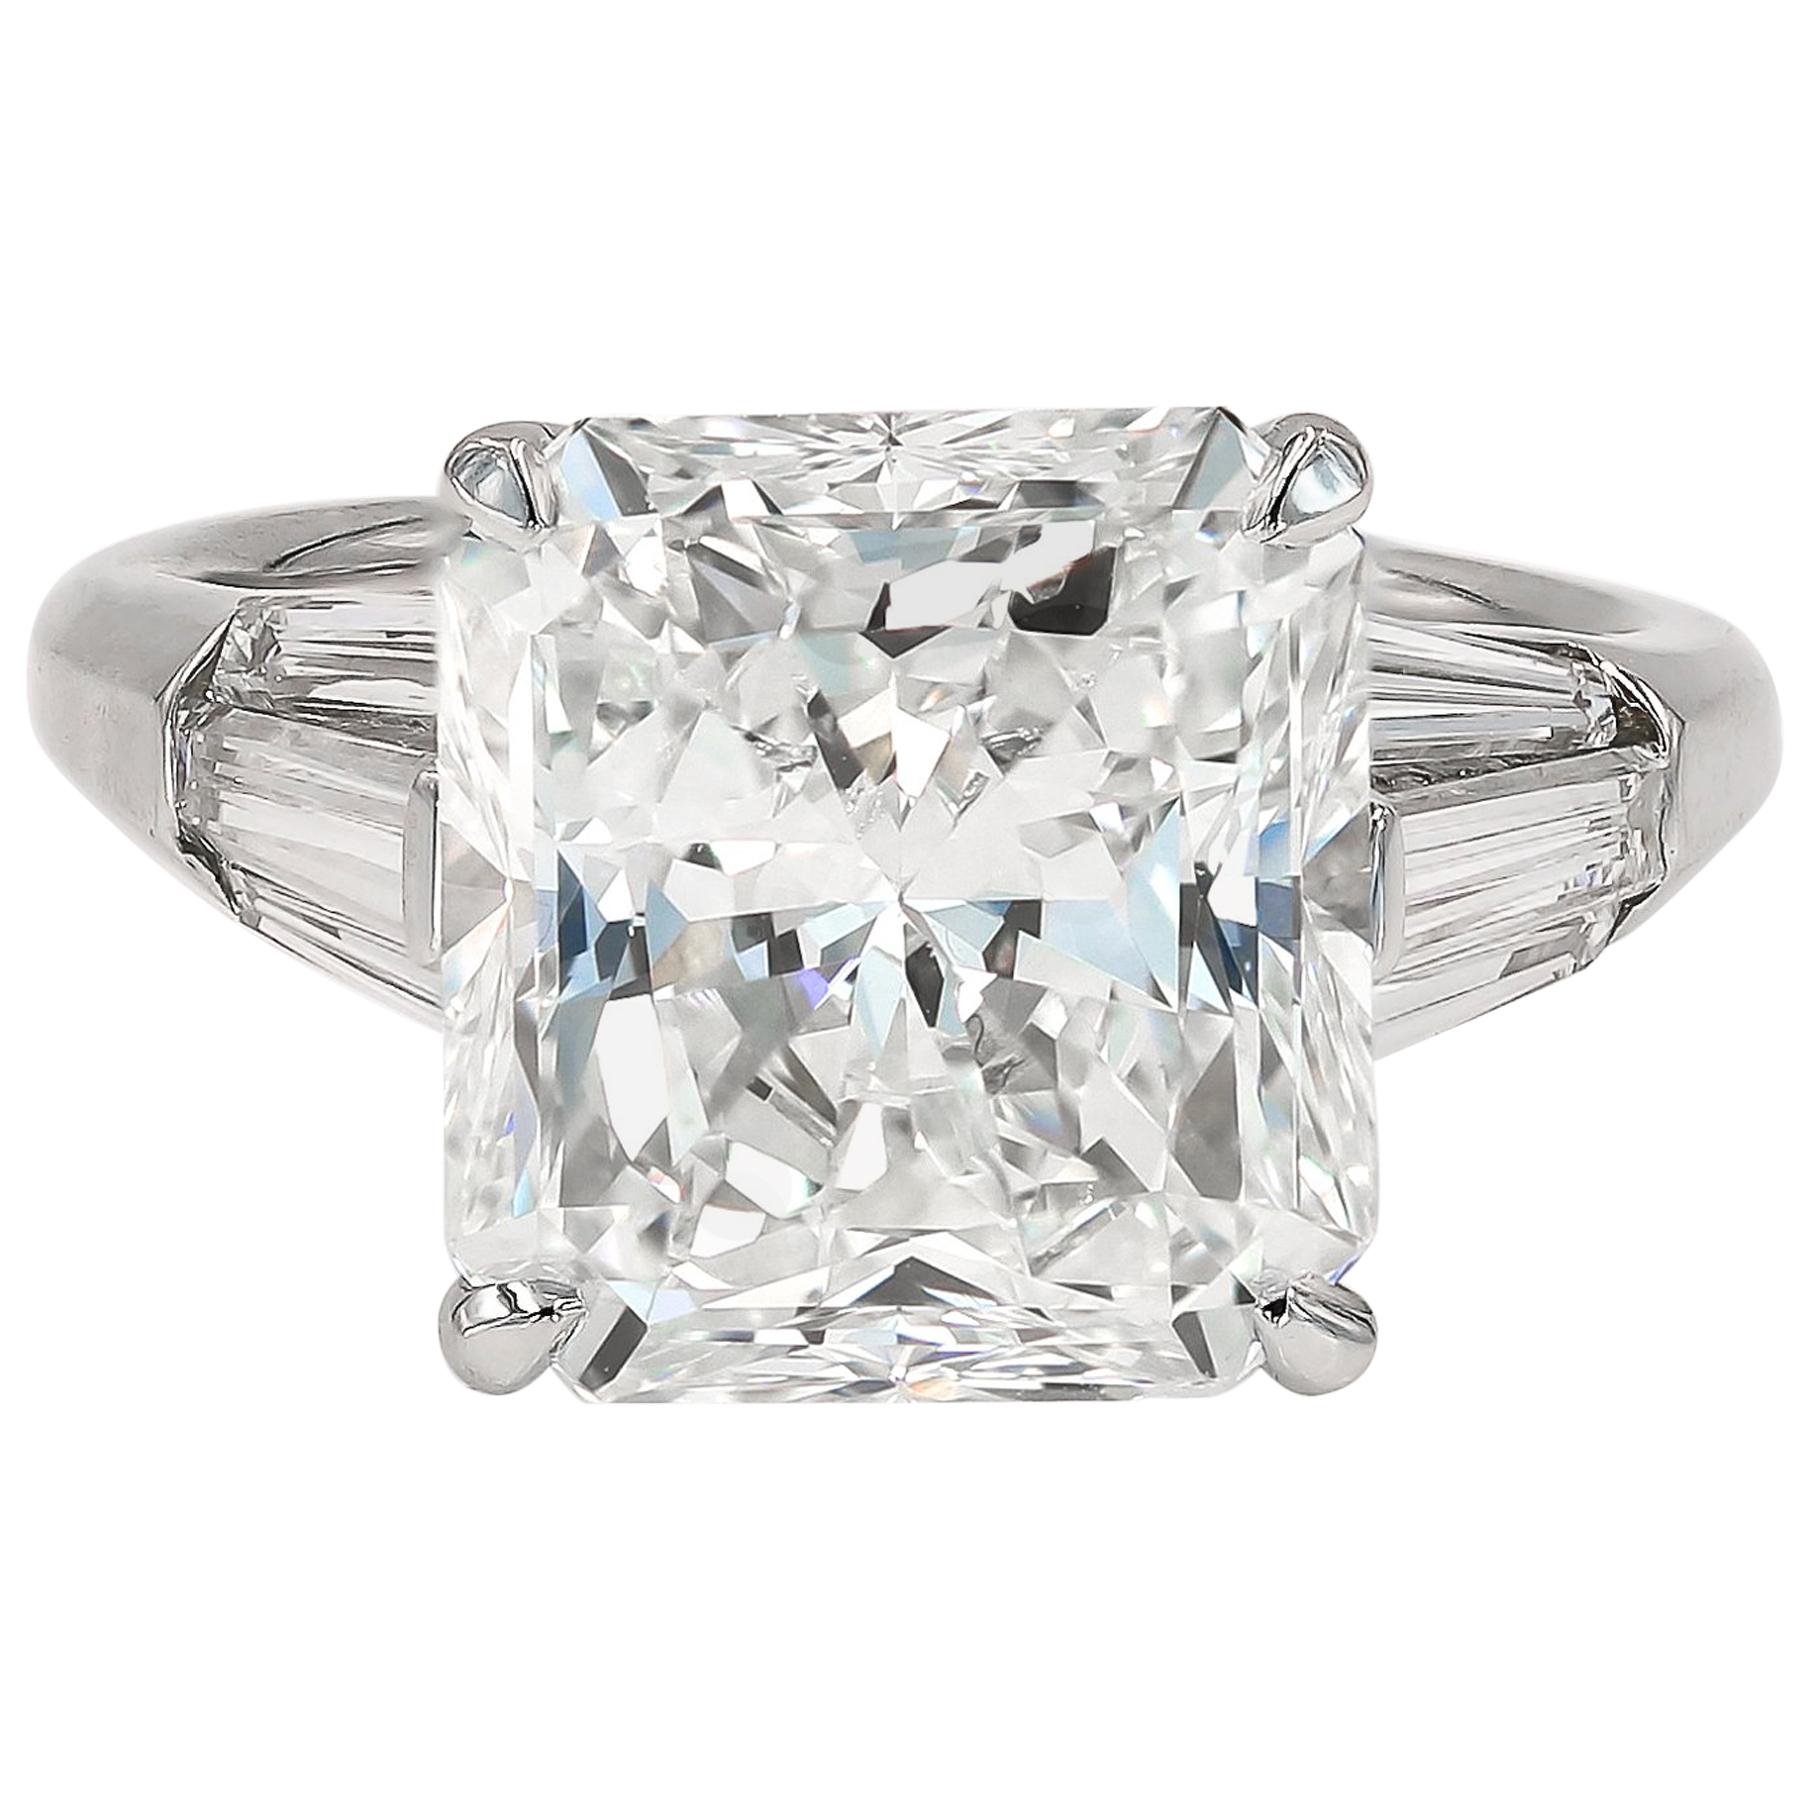 GIA Certified 6.14cts. Radiant Cut & Tapered Baguette Diamond Ring in Platinum